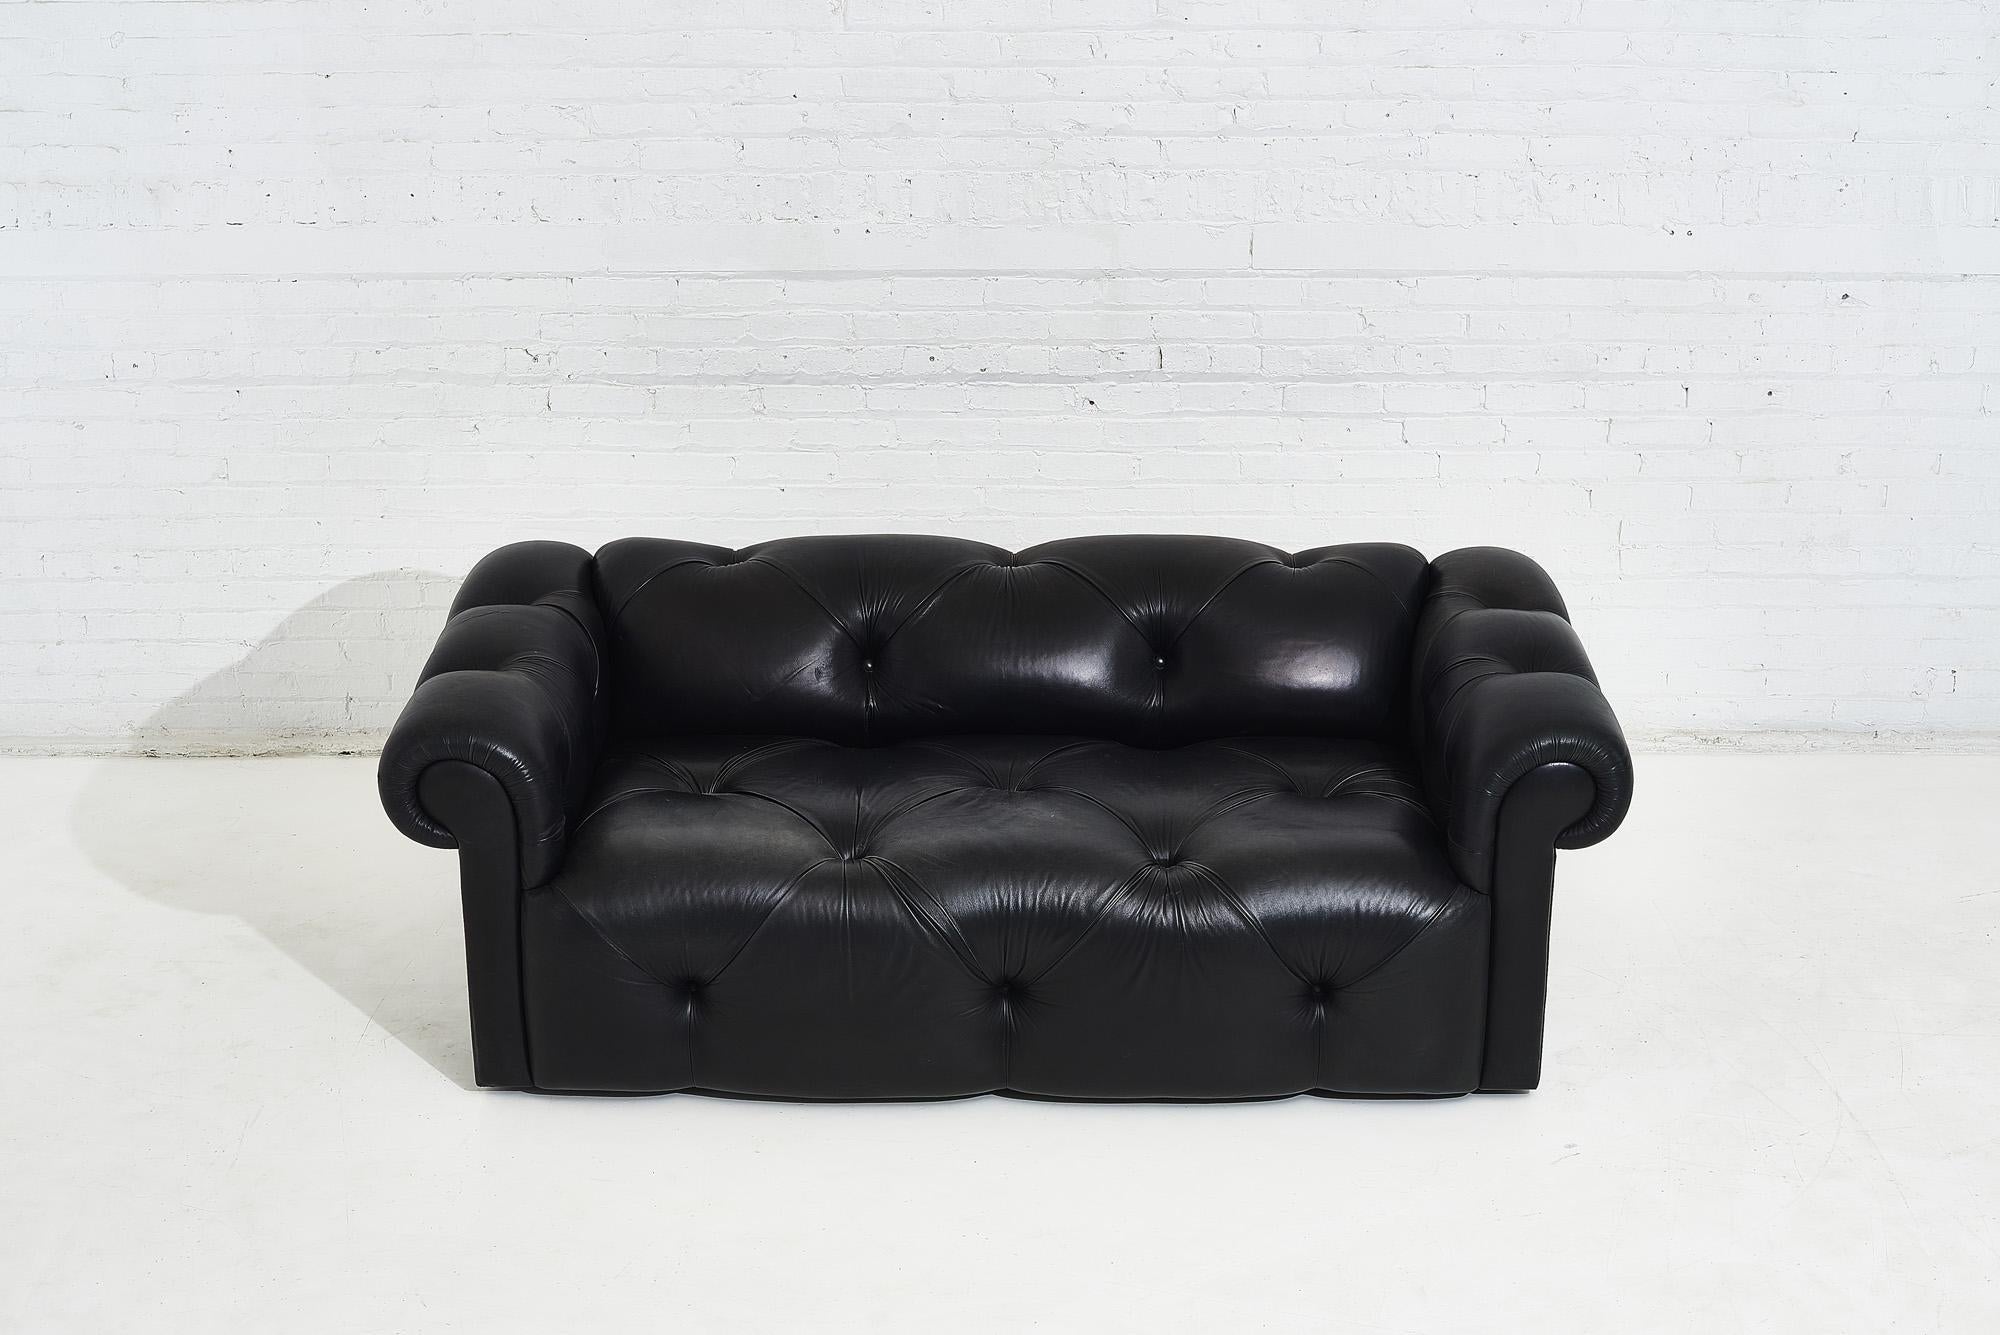 Black leather chesterfield tufted sofa by J Robert Scott. Incredibly soft leather with over size tufts. Original leather is in great condition, with fading across back that truly adds to its beauty.